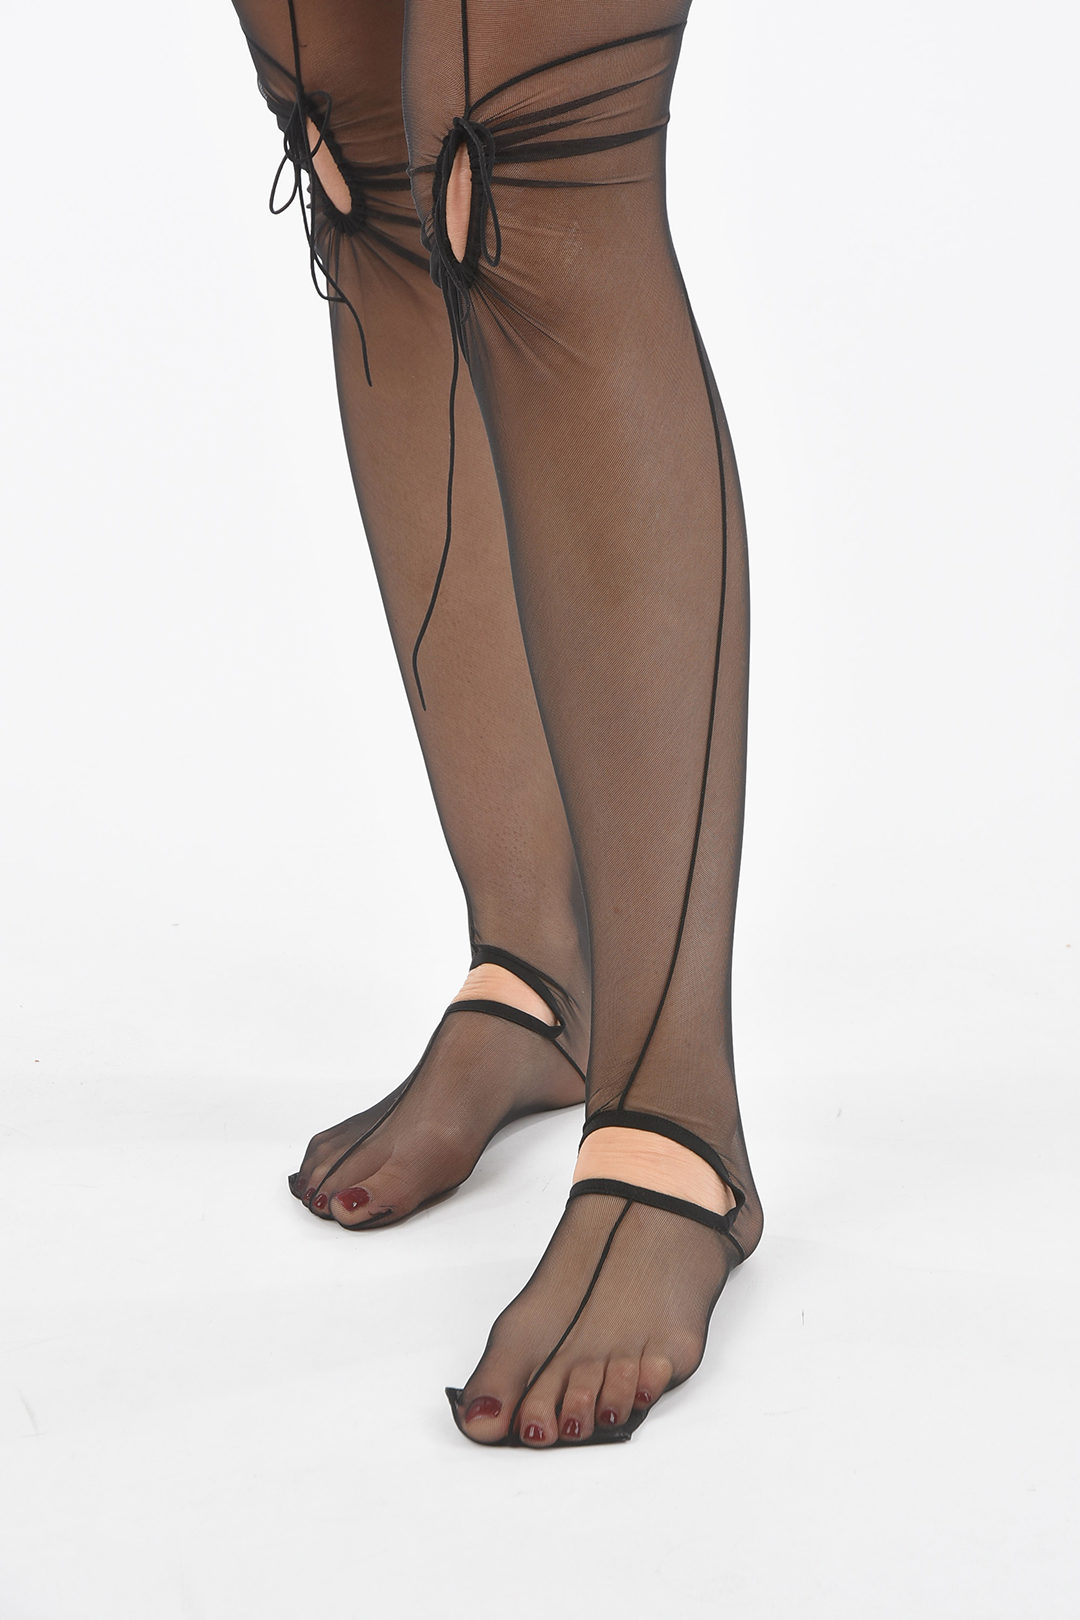 Nensi Dojaka Stretch Tulle High-wasited Tights Embellished with Strings and  Cut-out Detailing women - Glamood Outlet